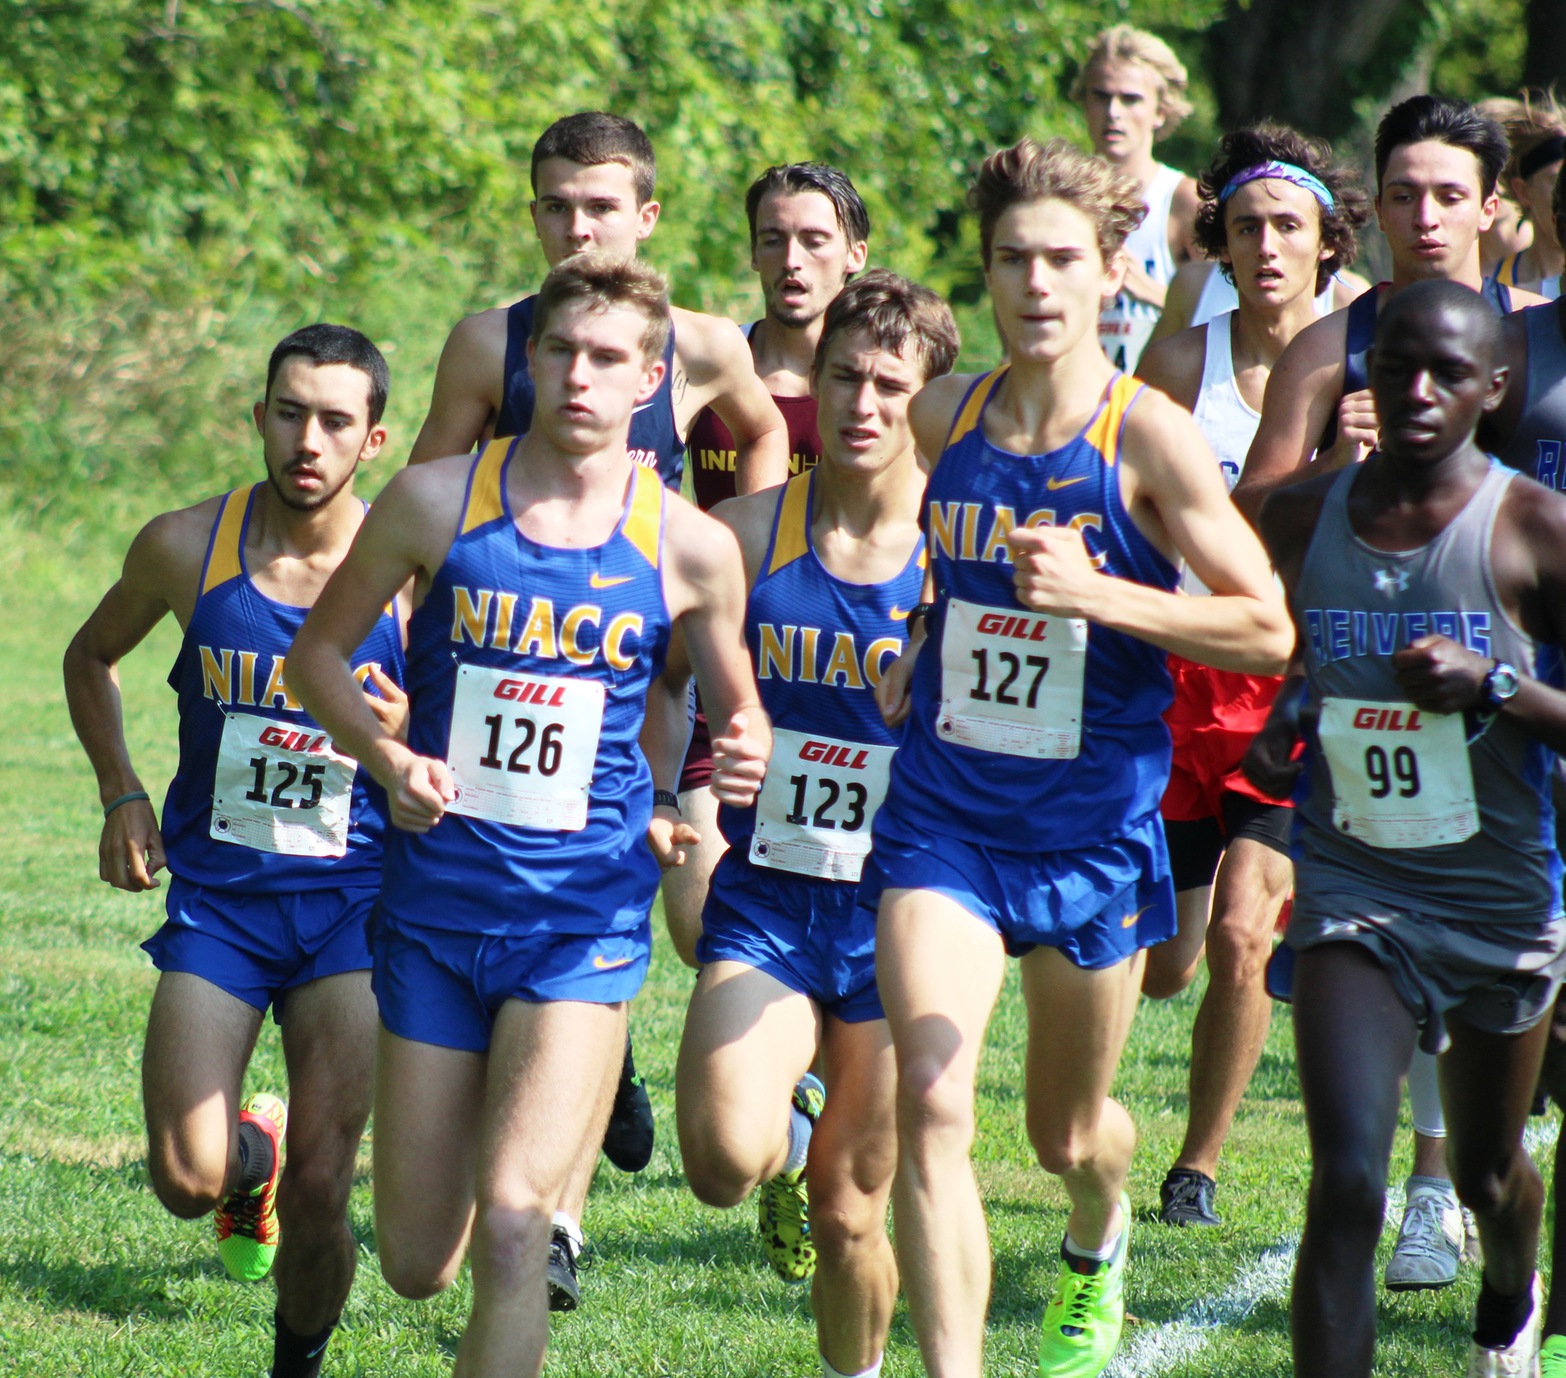 NIACC men compete at the NJCAA Region XI time trial earlier this season.